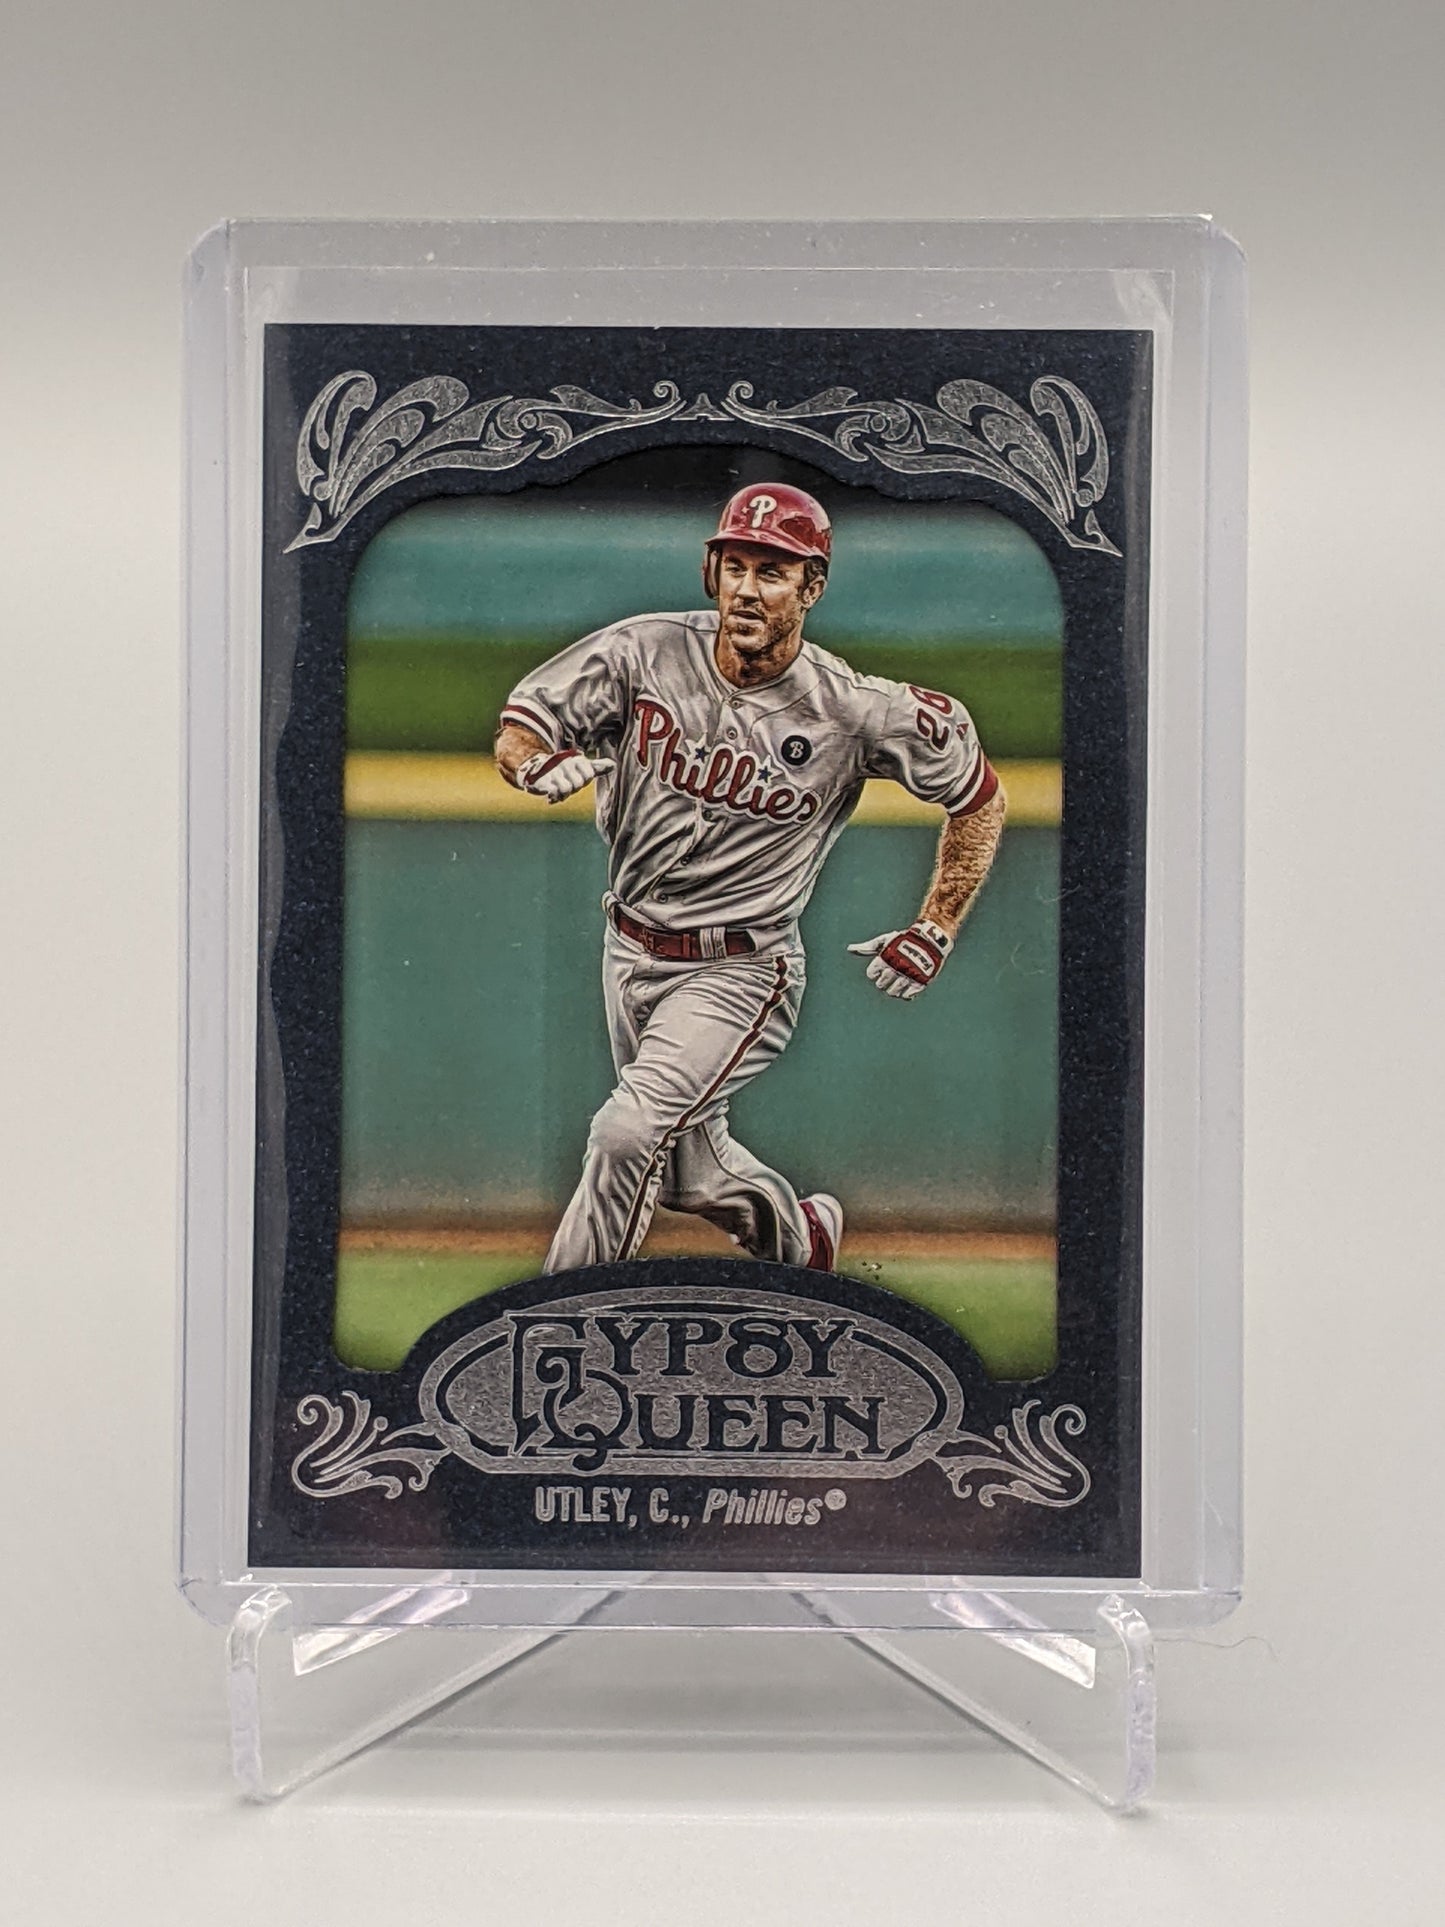 2012 Topps Gypsy Queen Blue Framed Chase Utley Phillies